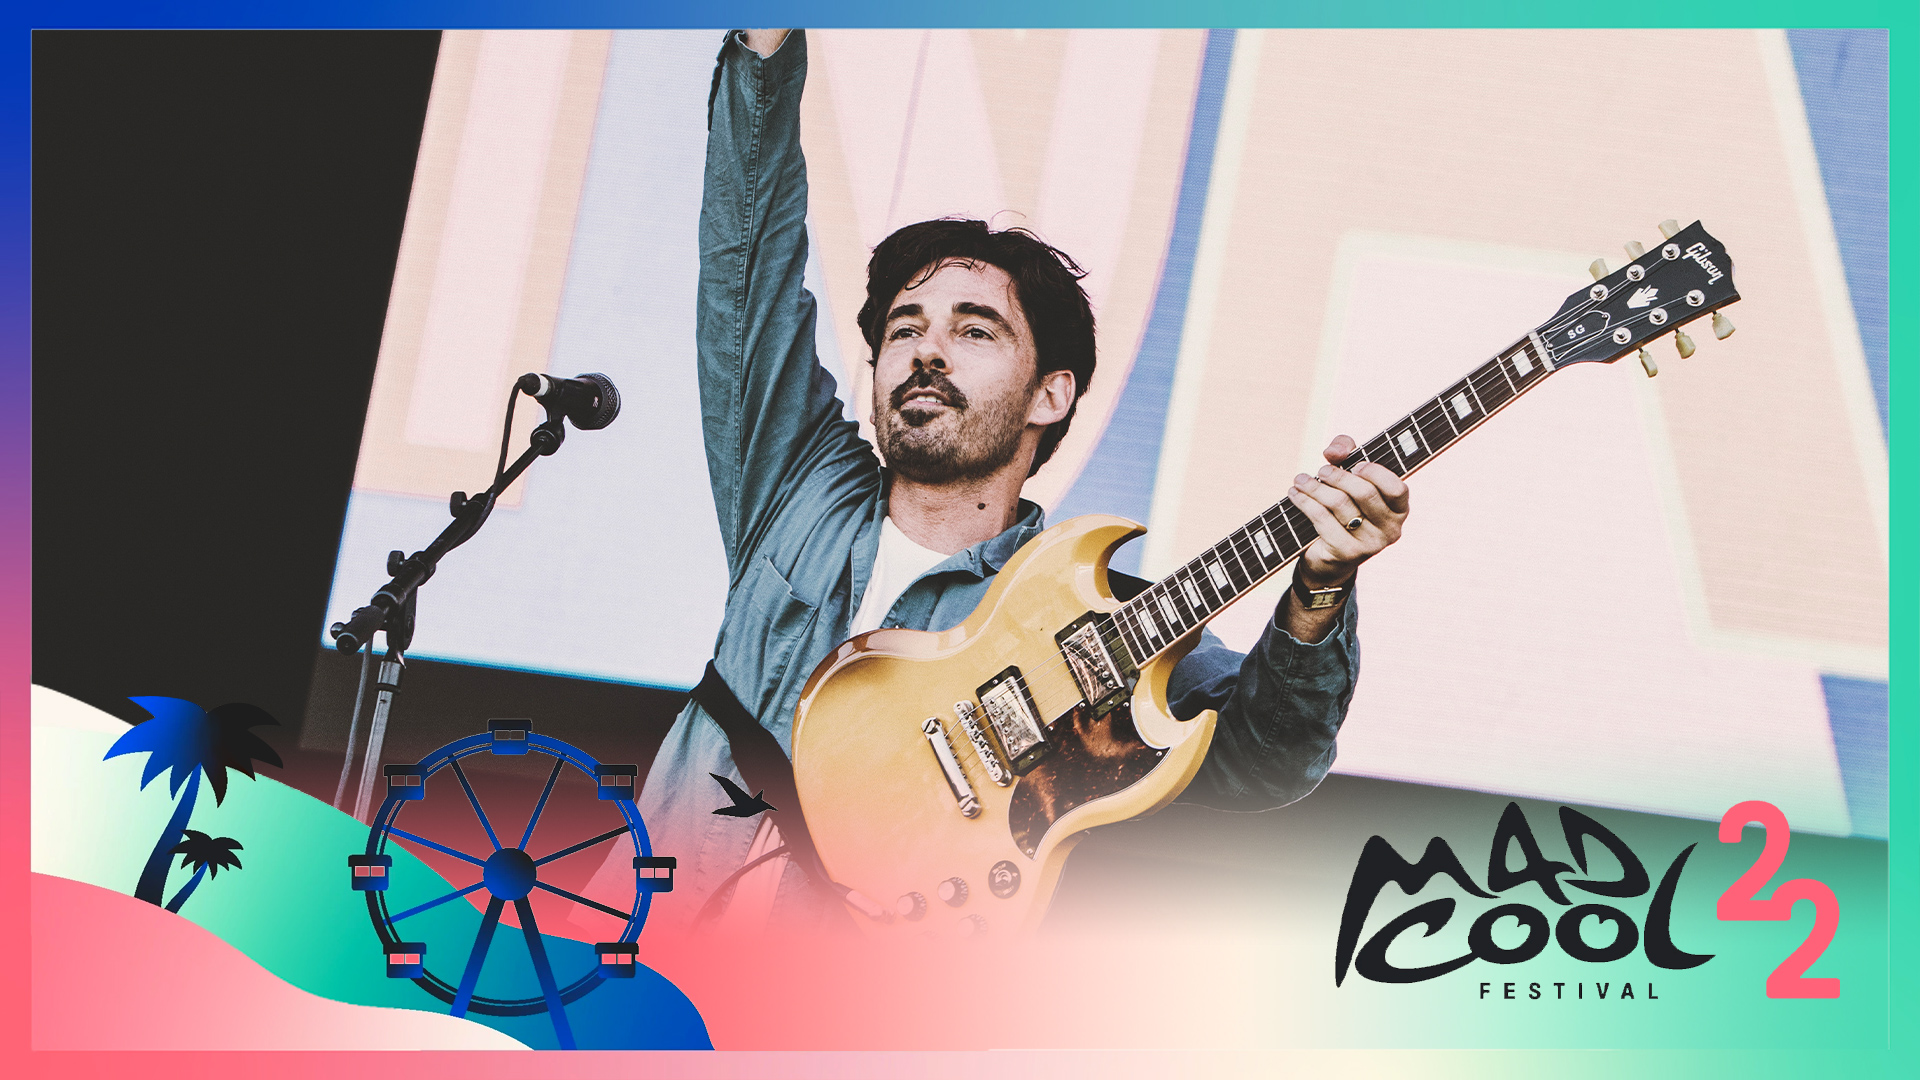 Local Natives at Mad Cool Festival 2022: Hummingbird's 10th Anniversary Plans and New Music